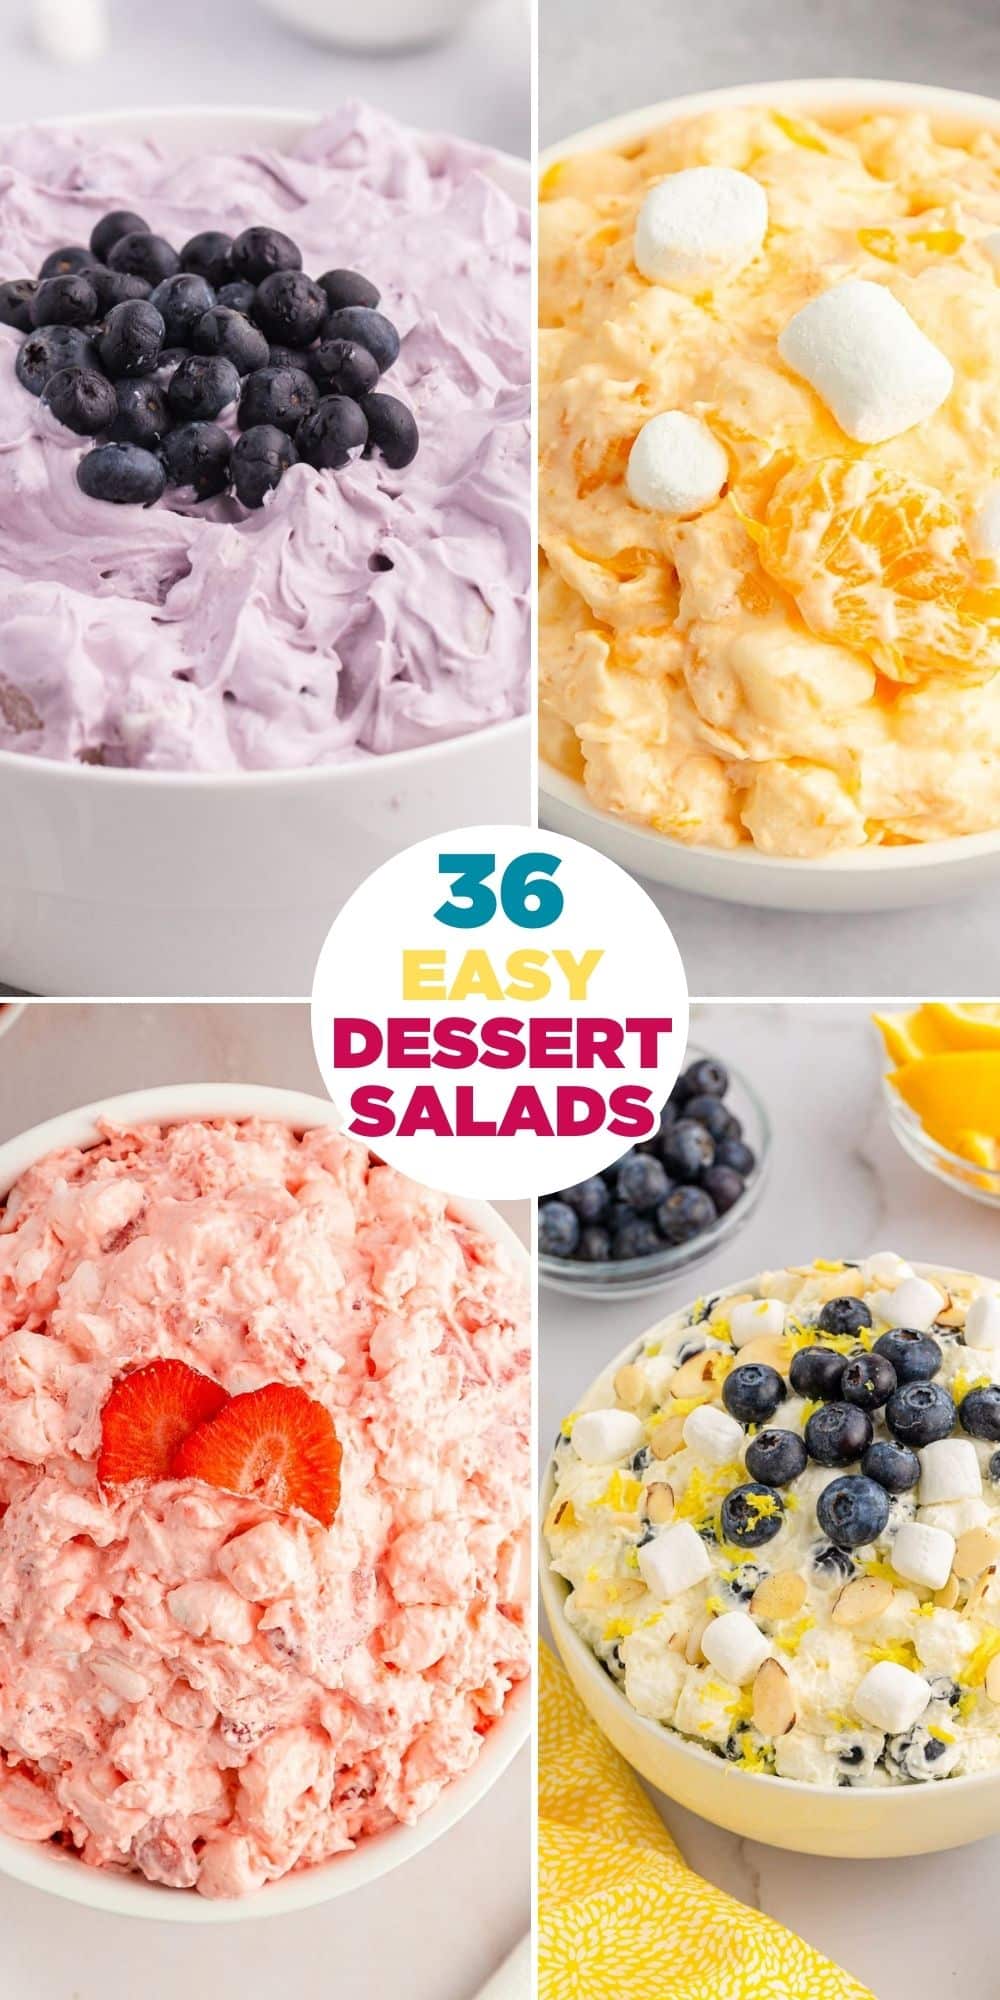 This collection of Easy Dessert Salad Recipes features a wonderful variety of scrumptious, cool and refreshing creations that are perfect for any occasion. From sweet and creamy to zesty and fruity, these recipes are a delightful and lighter twist on traditional desserts. 